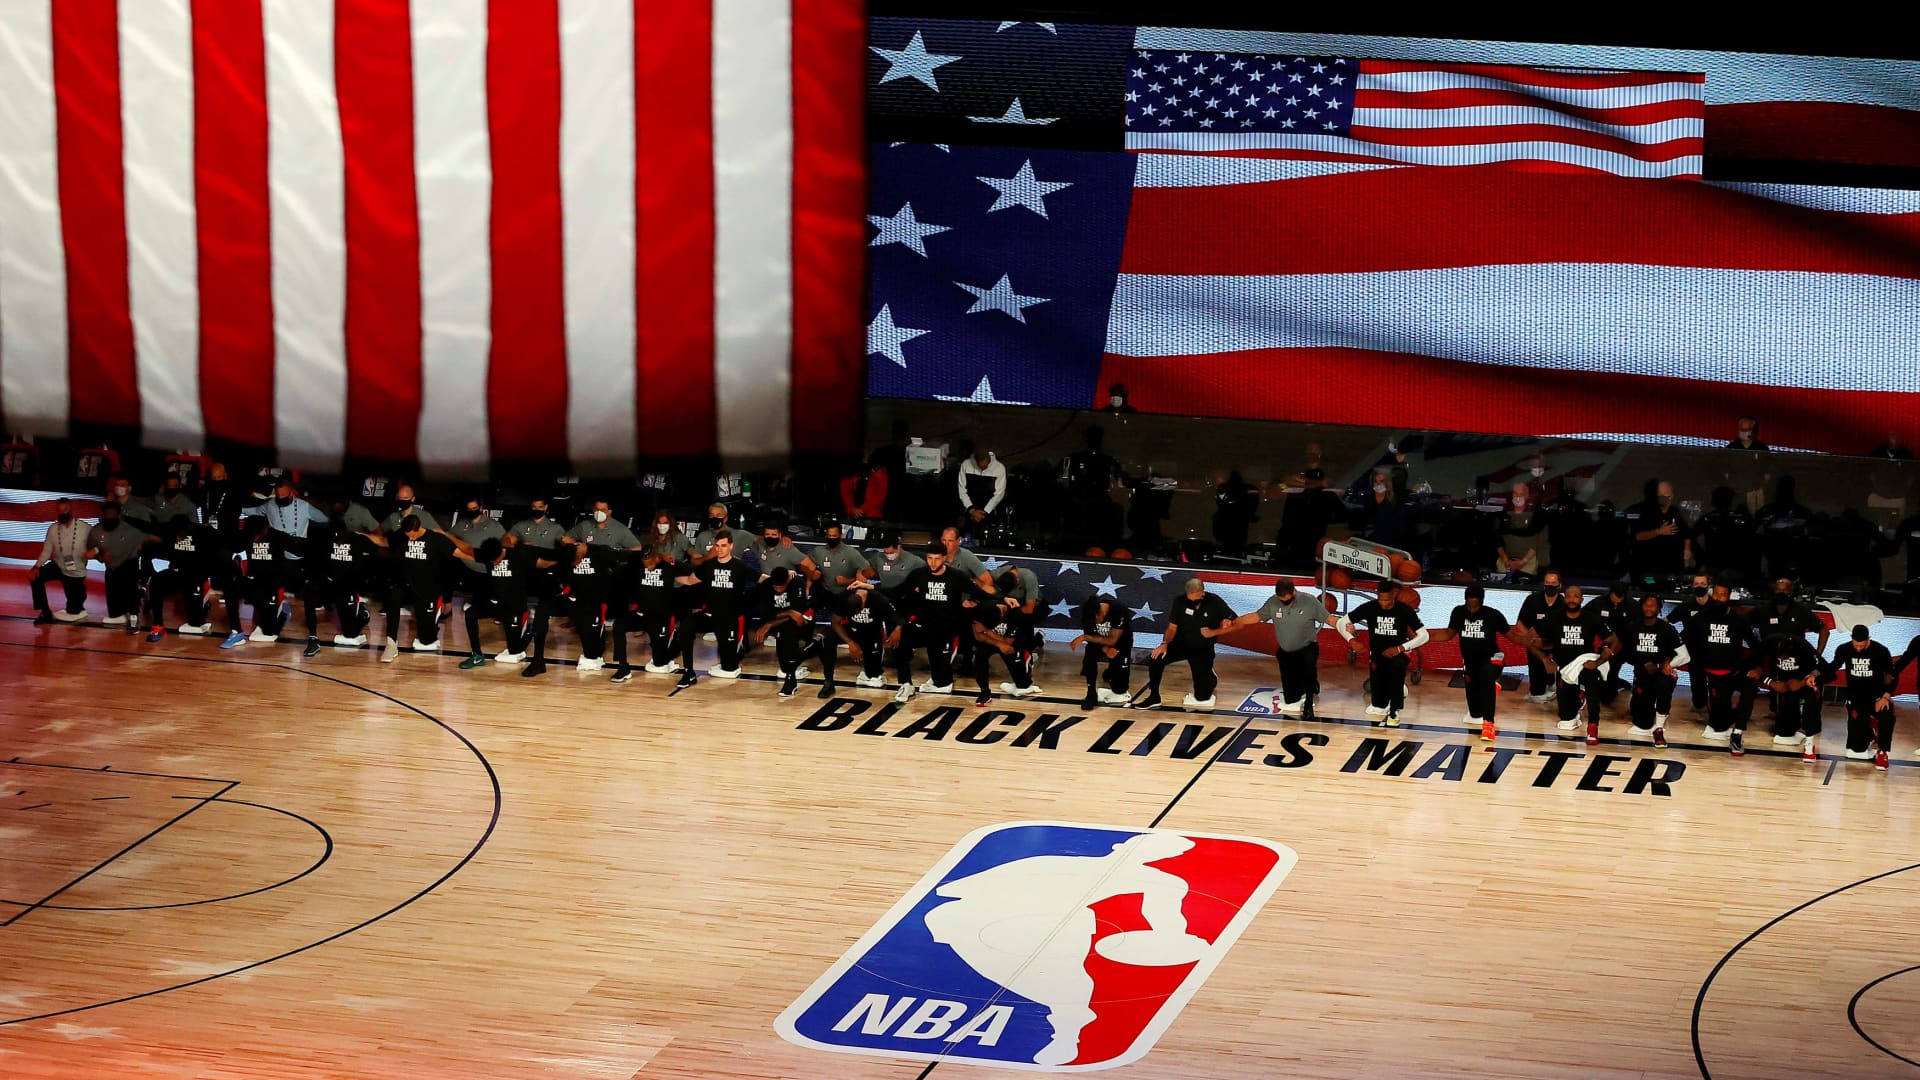 Players, coaches and staff kneel during the national anthem before the game between the Houston Rockets and the Portland Trail Blazers at The Arena at ESPN Wide World Of Sports Complex on August 04, 2020 in Lake Buena Vista, Florida.